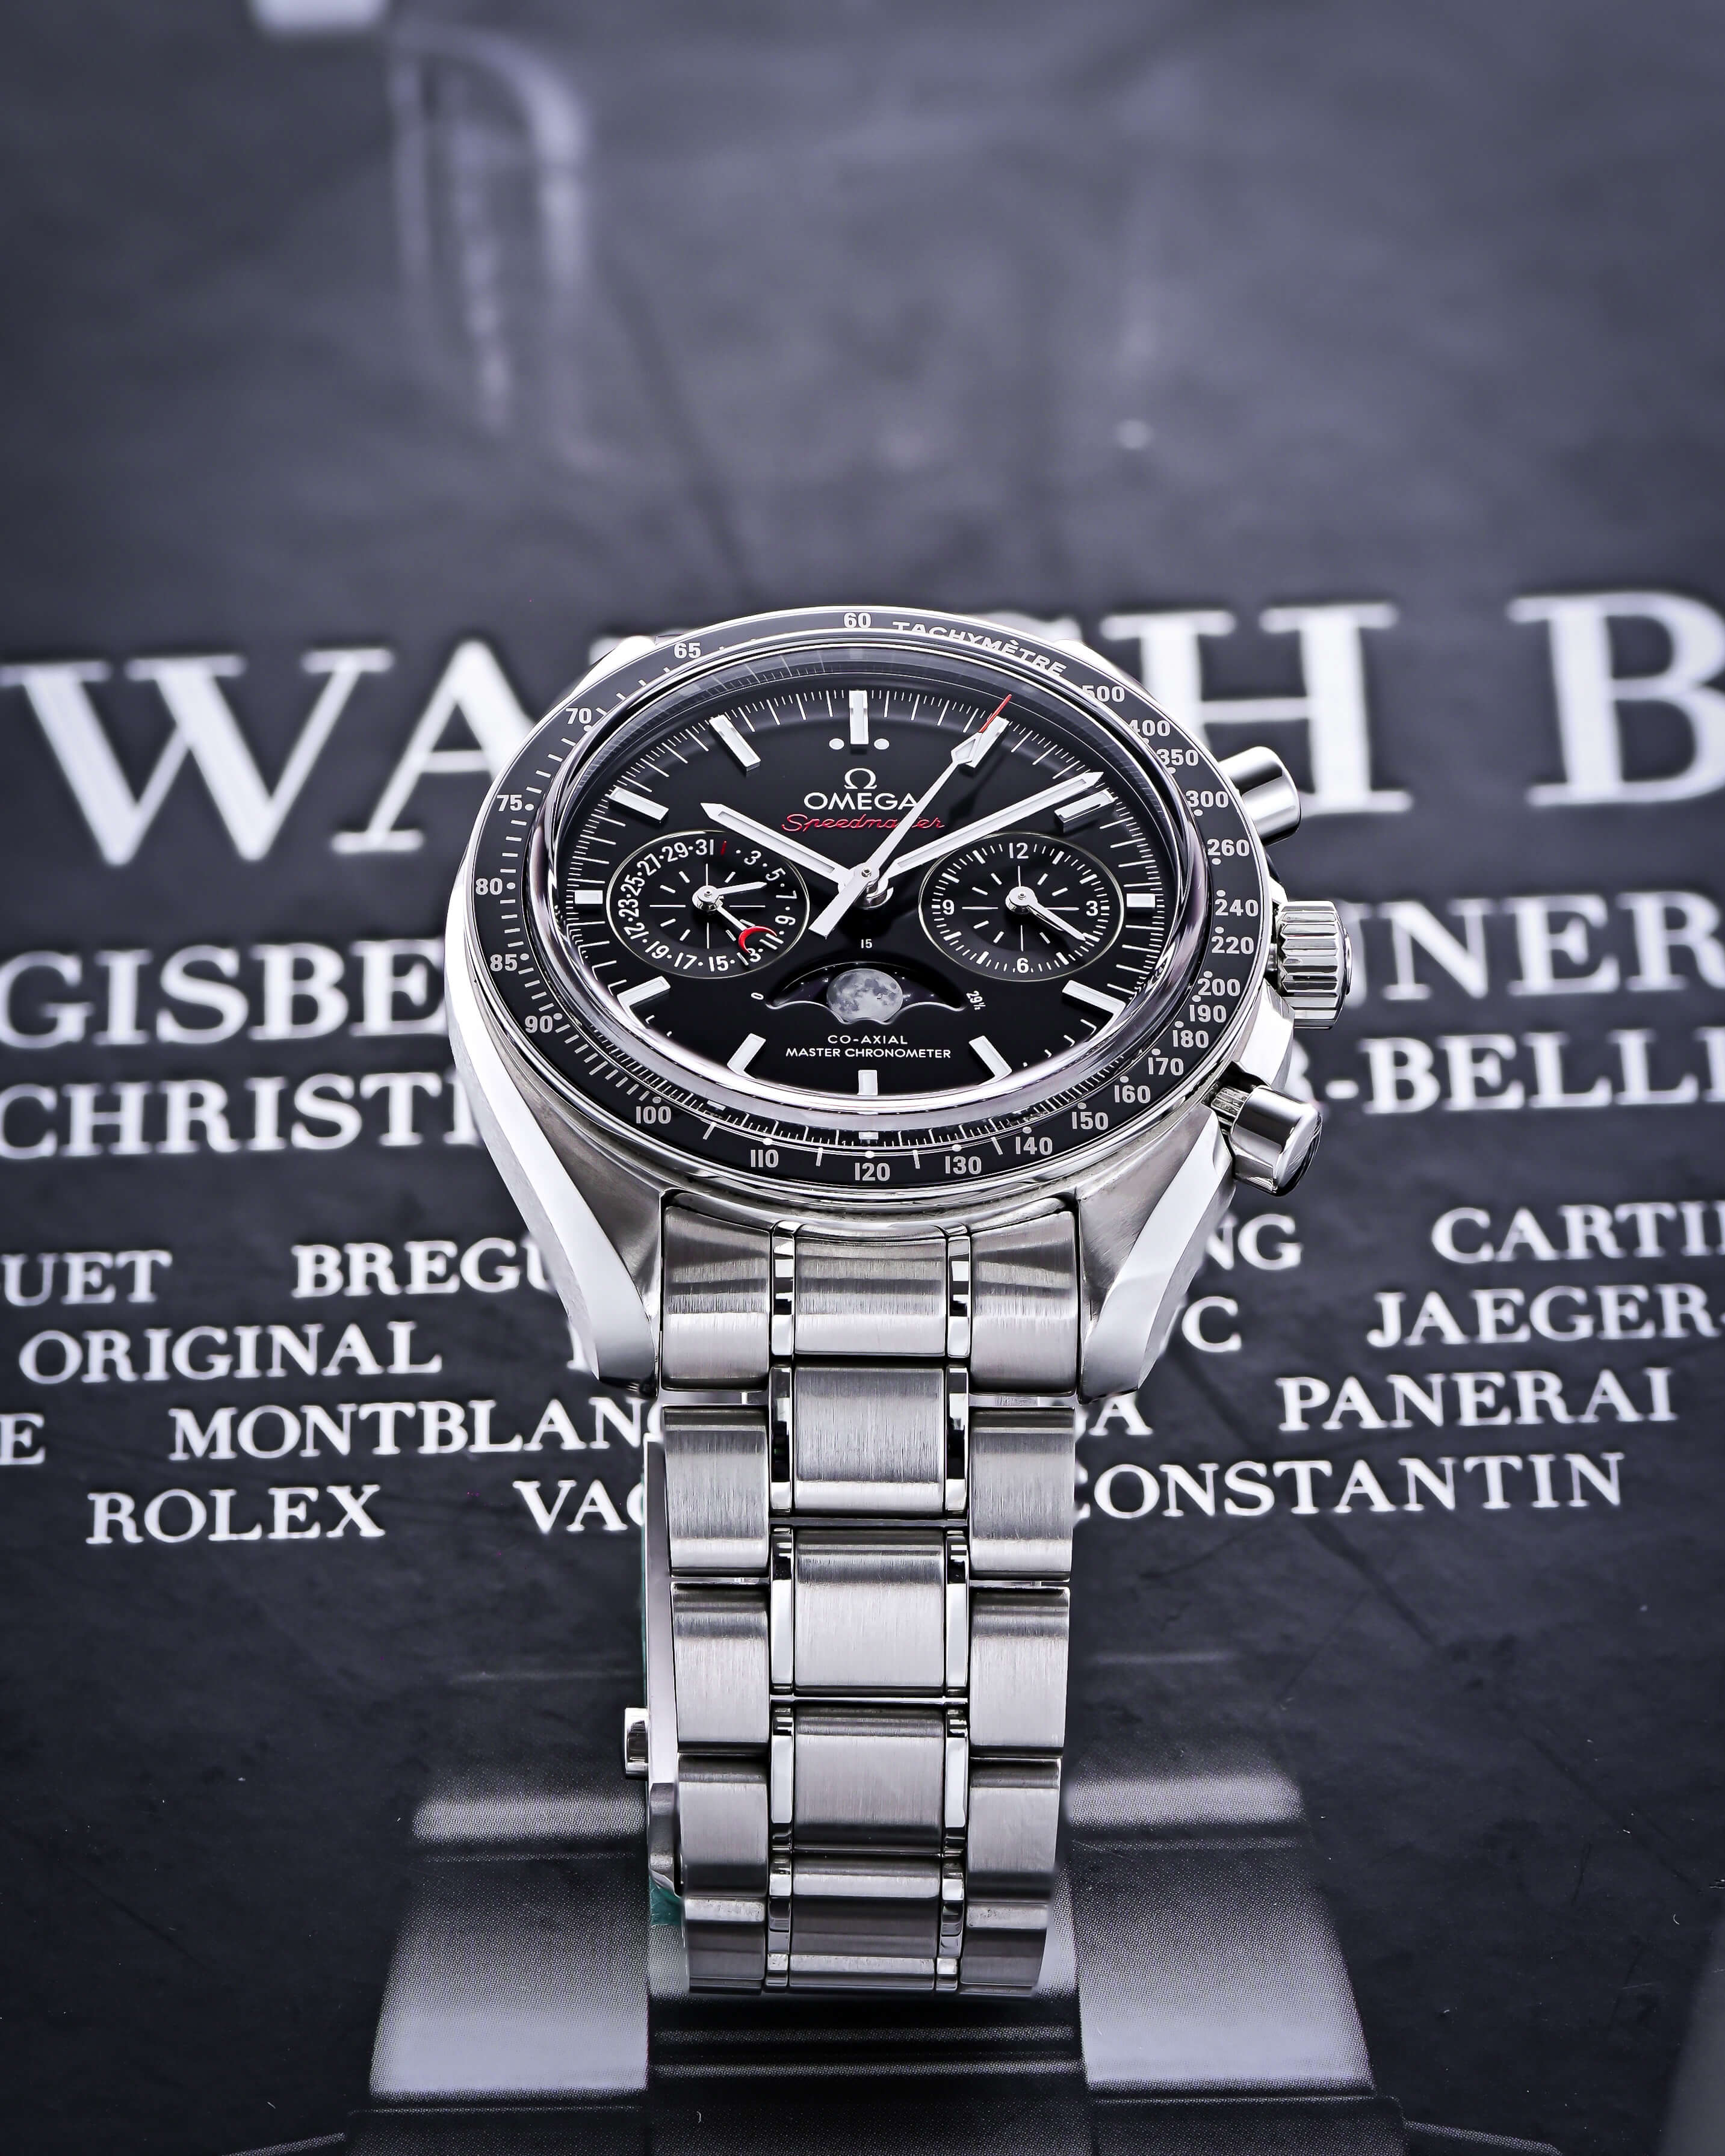 Stainless Steel 44 mm Case, Tachymeter Ceramic Bezel with 3 Dials on a Black and White Background